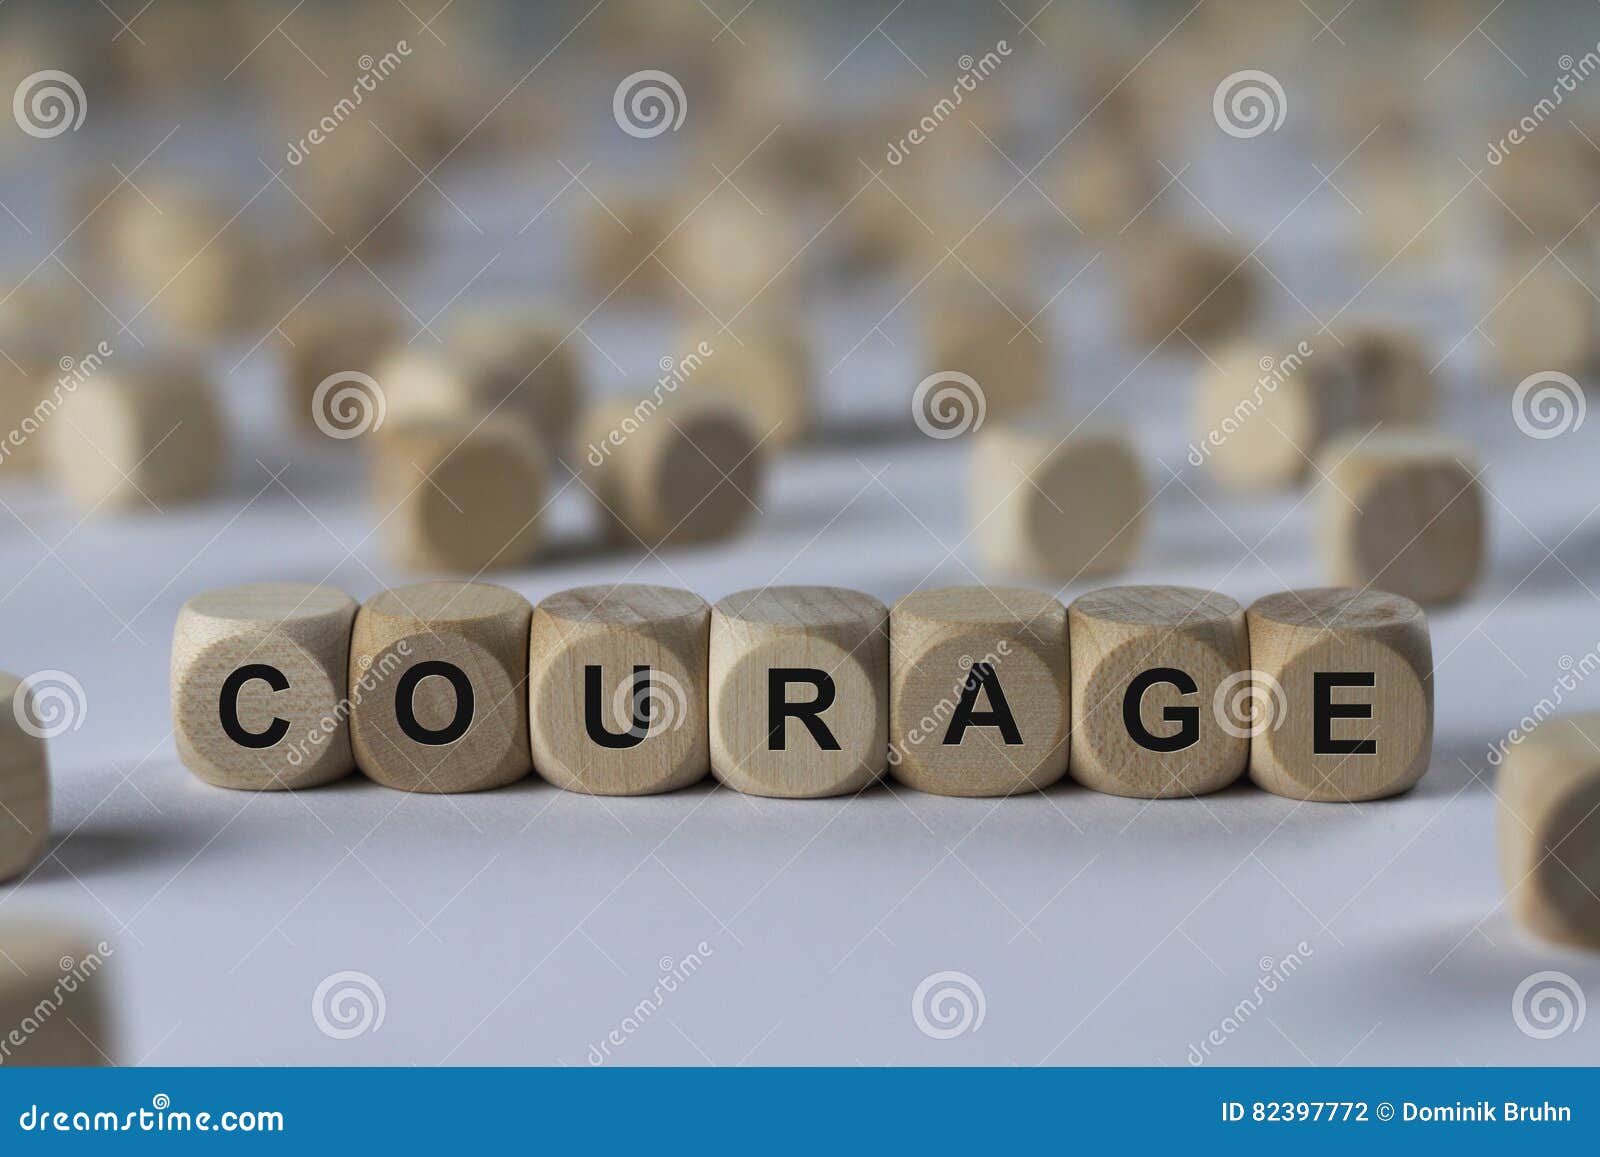 courage - cube with letters, sign with wooden cubes